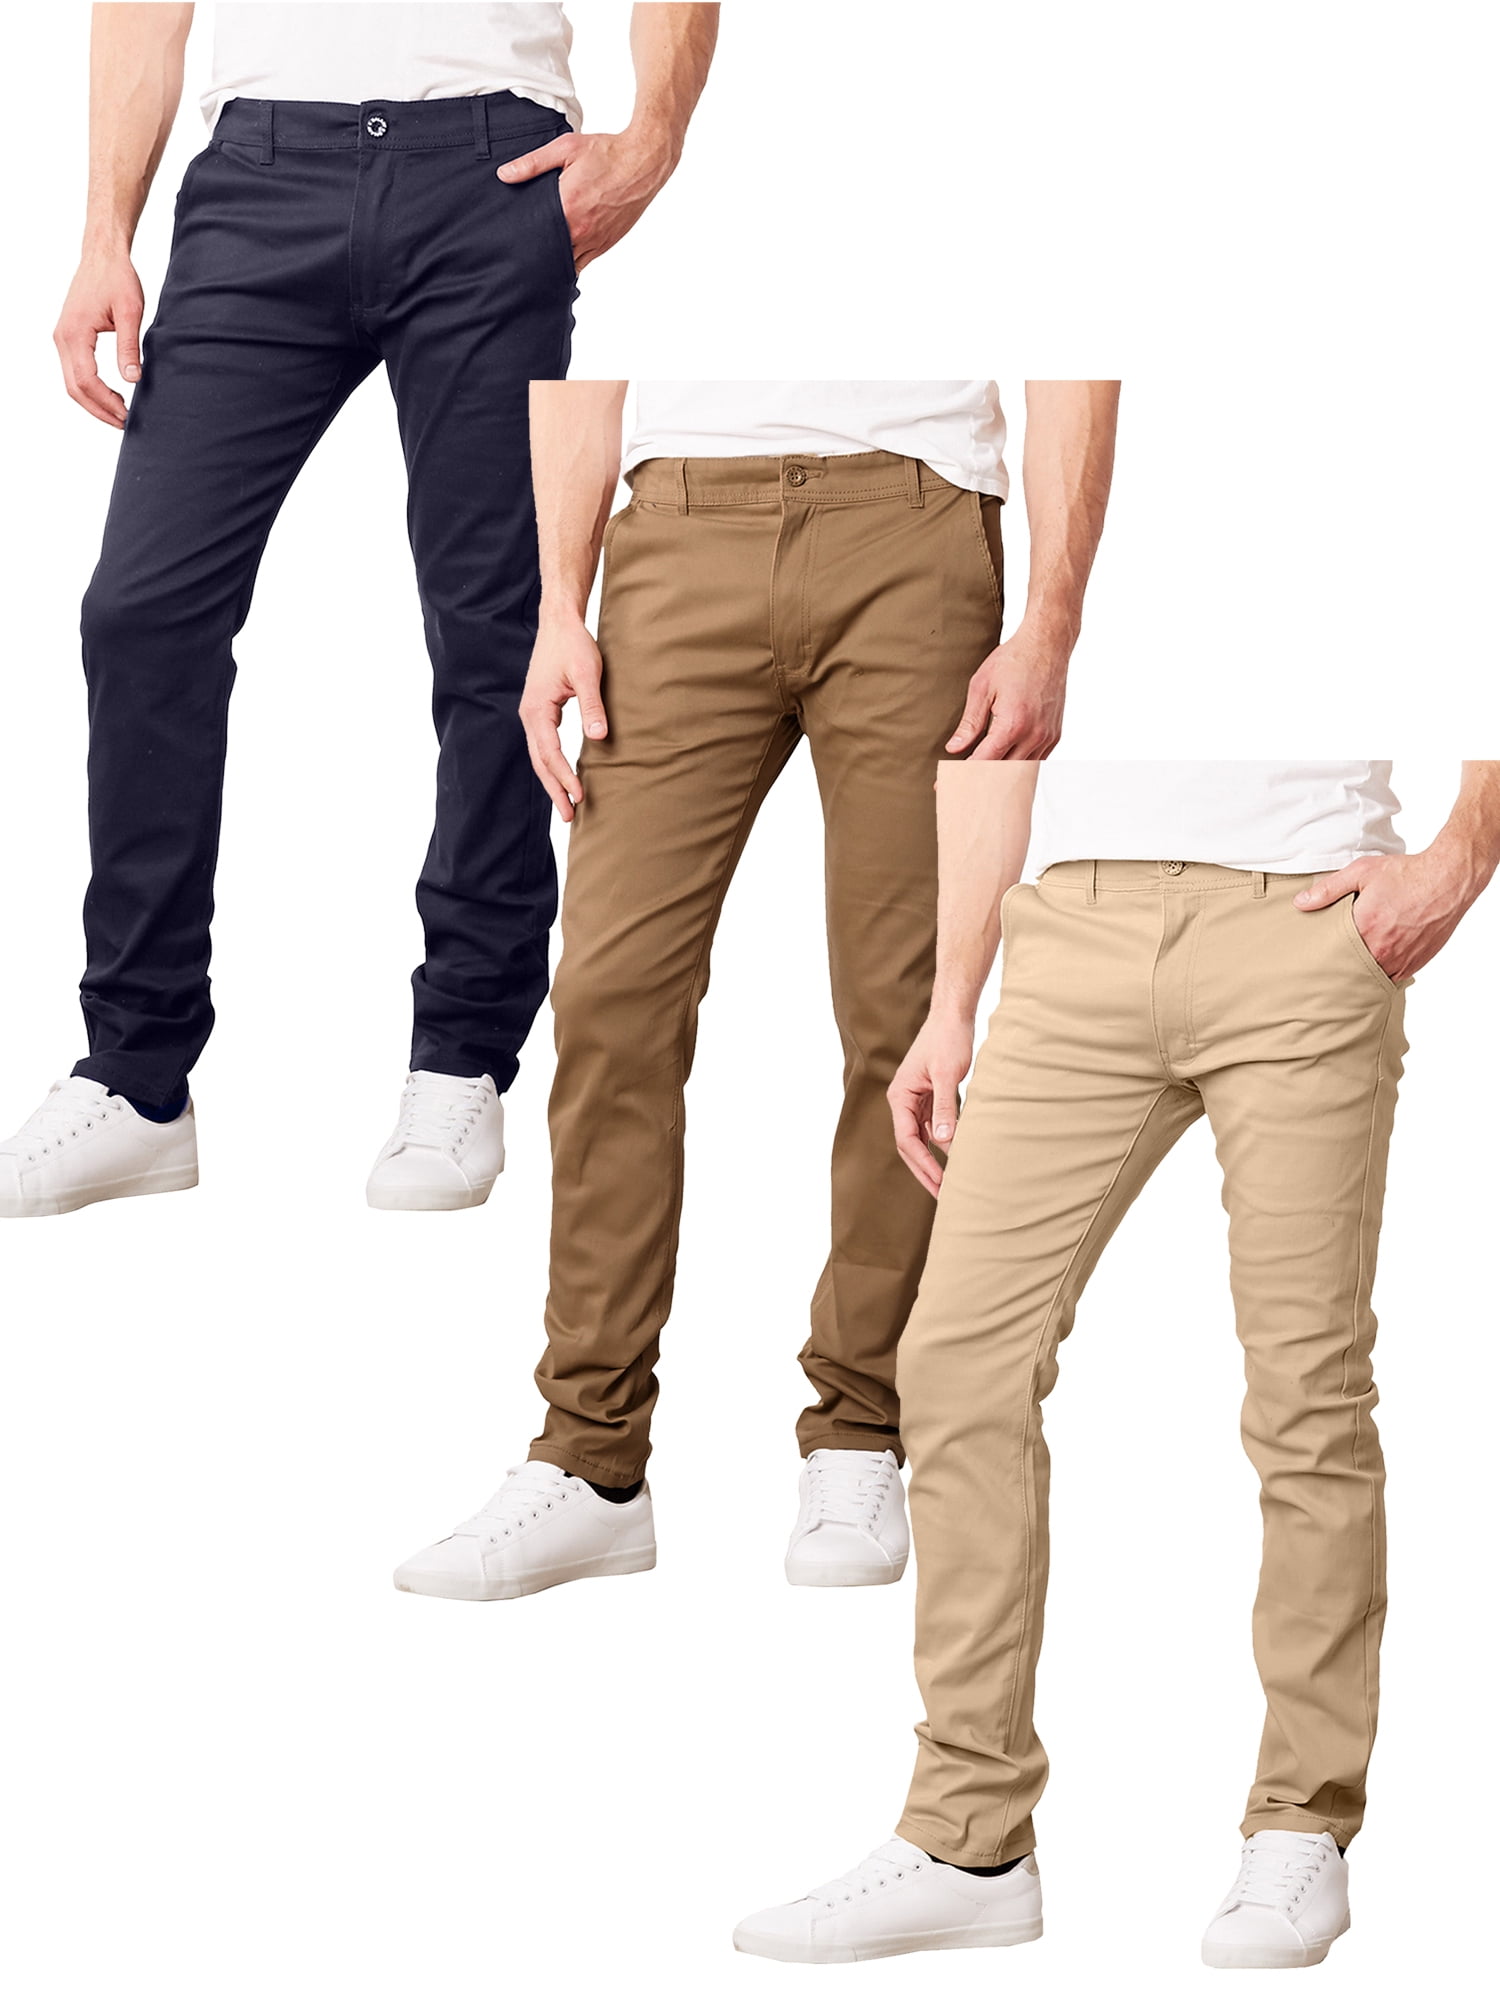 3-Pack Men\'s Super Stretch Slim Fit Everyday Chino Pants (Sizes, 30-42)